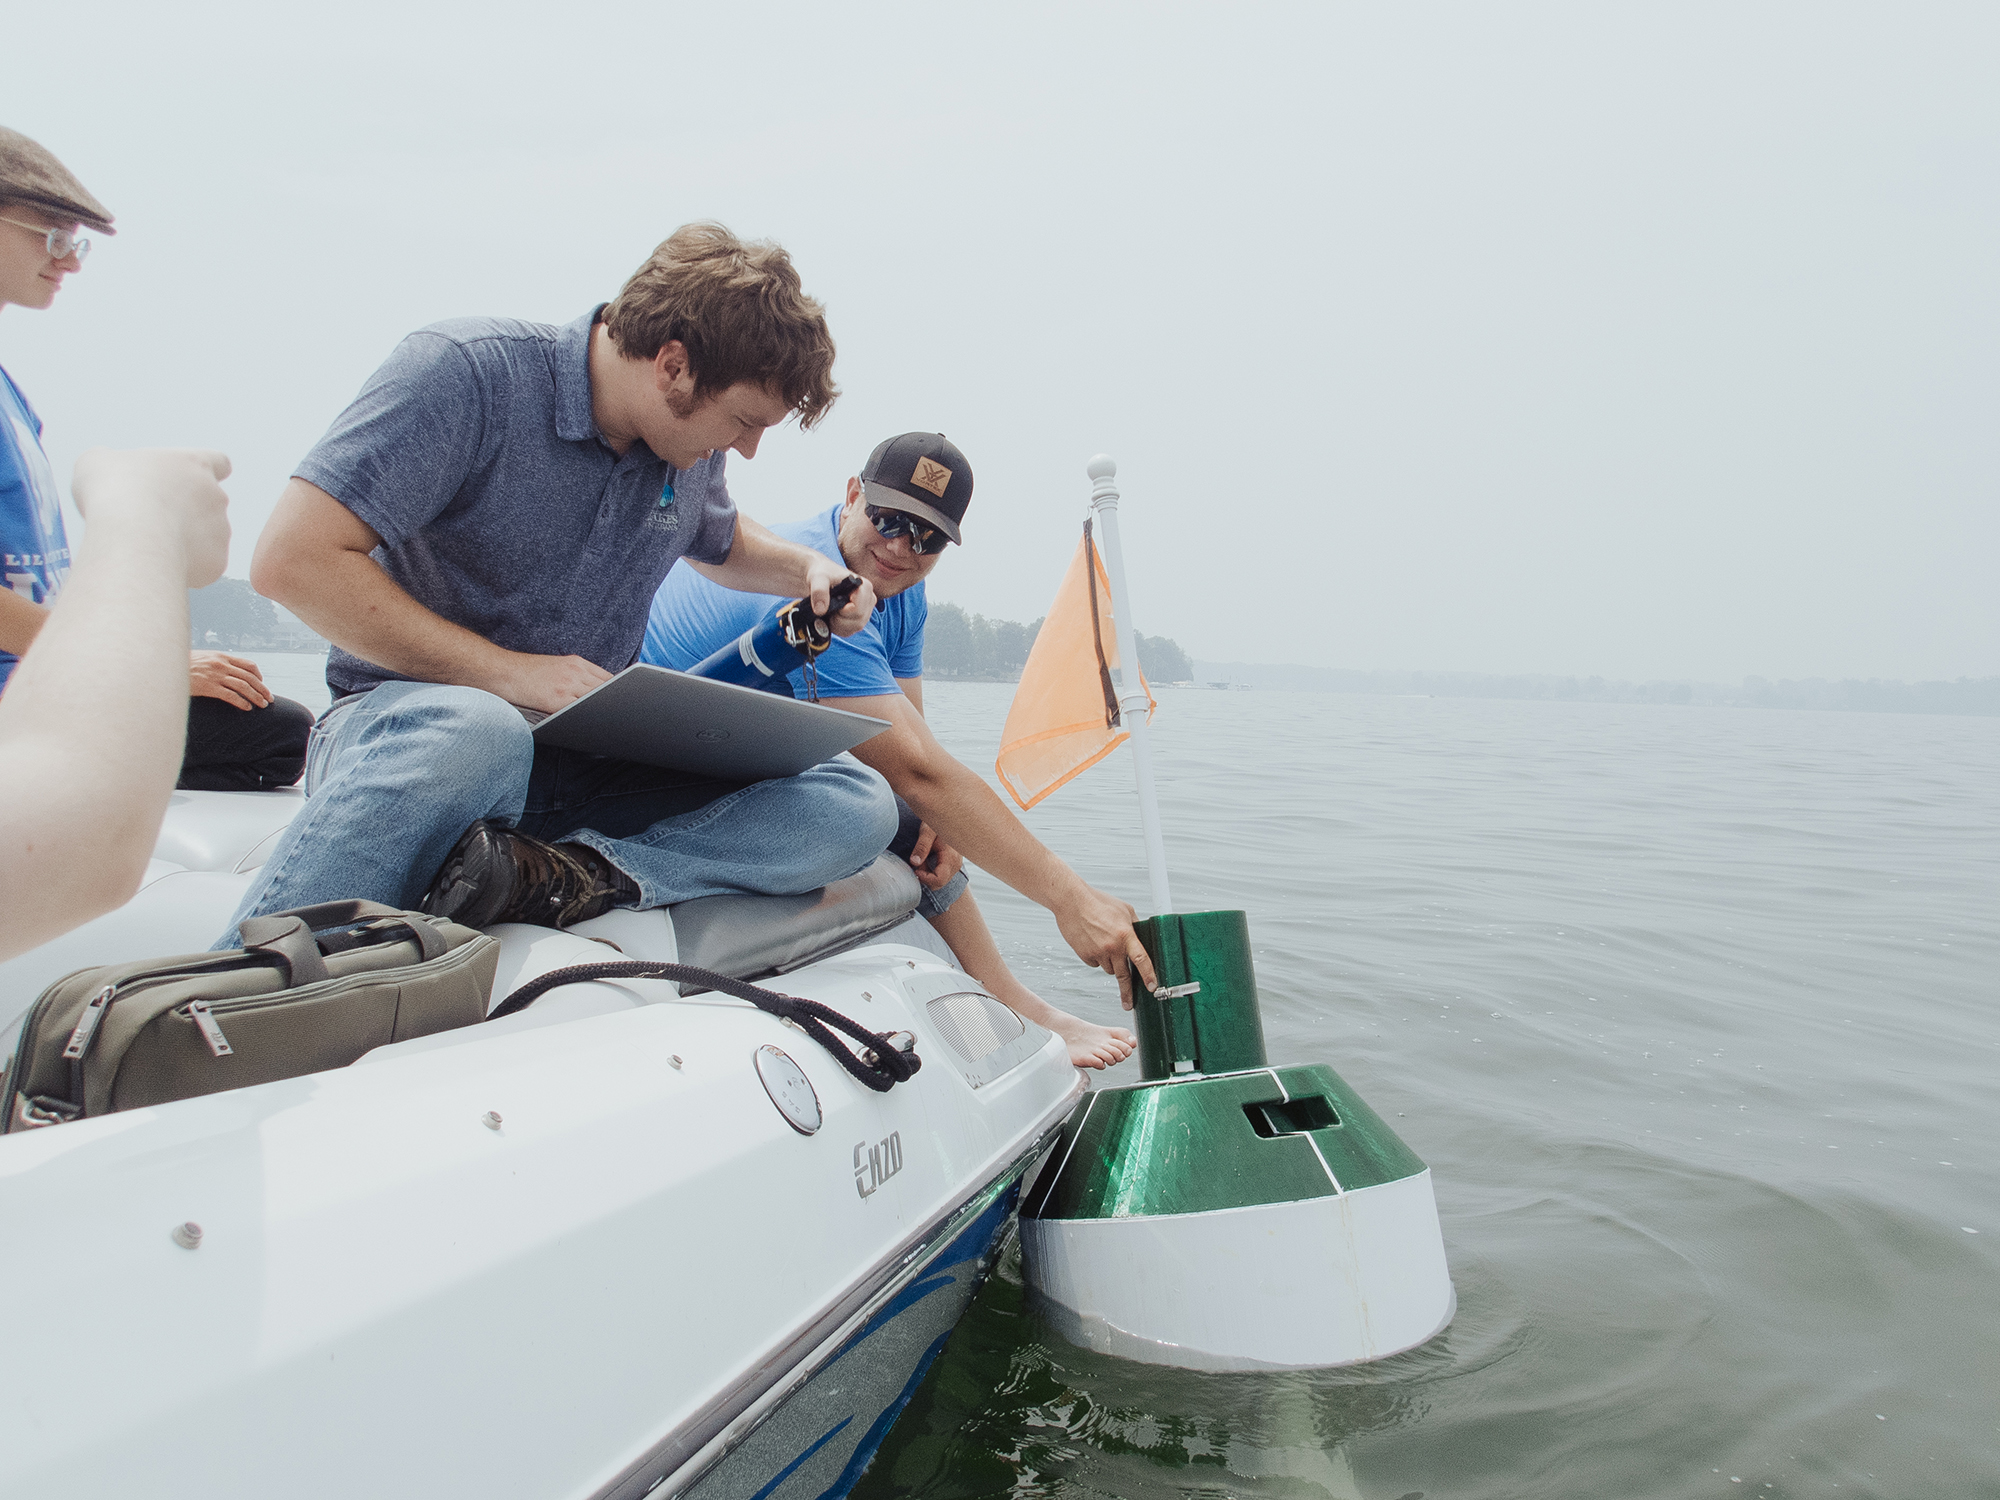 Research Buoy Returns to Lake Wawasee for Another Year of Data